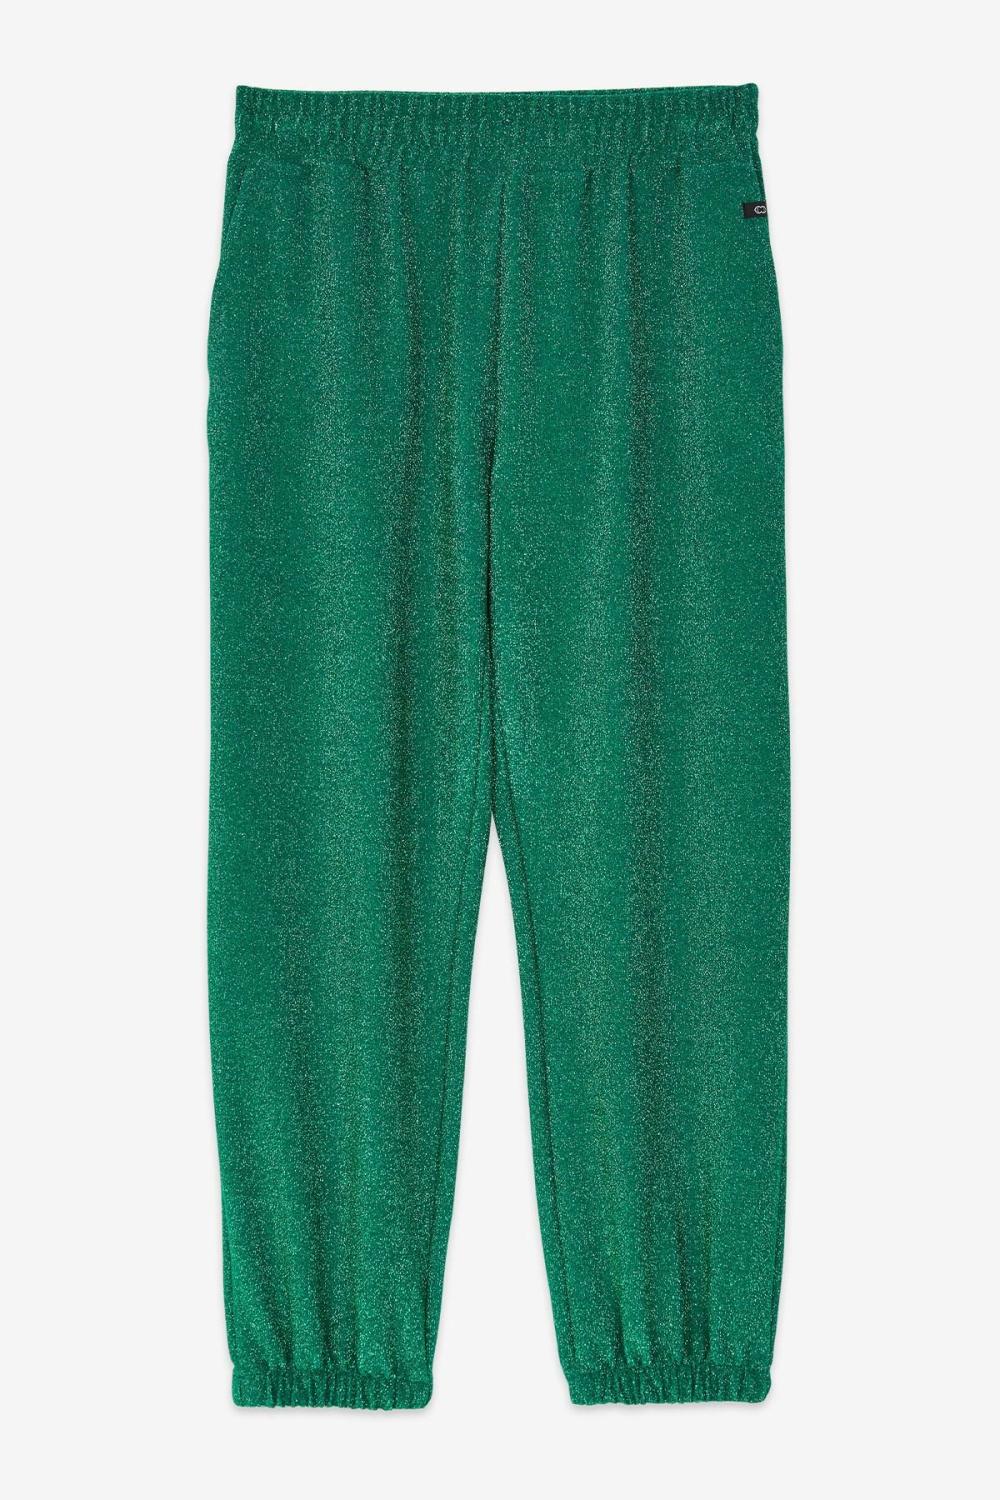 Trousers With Lurex Brilliante Green